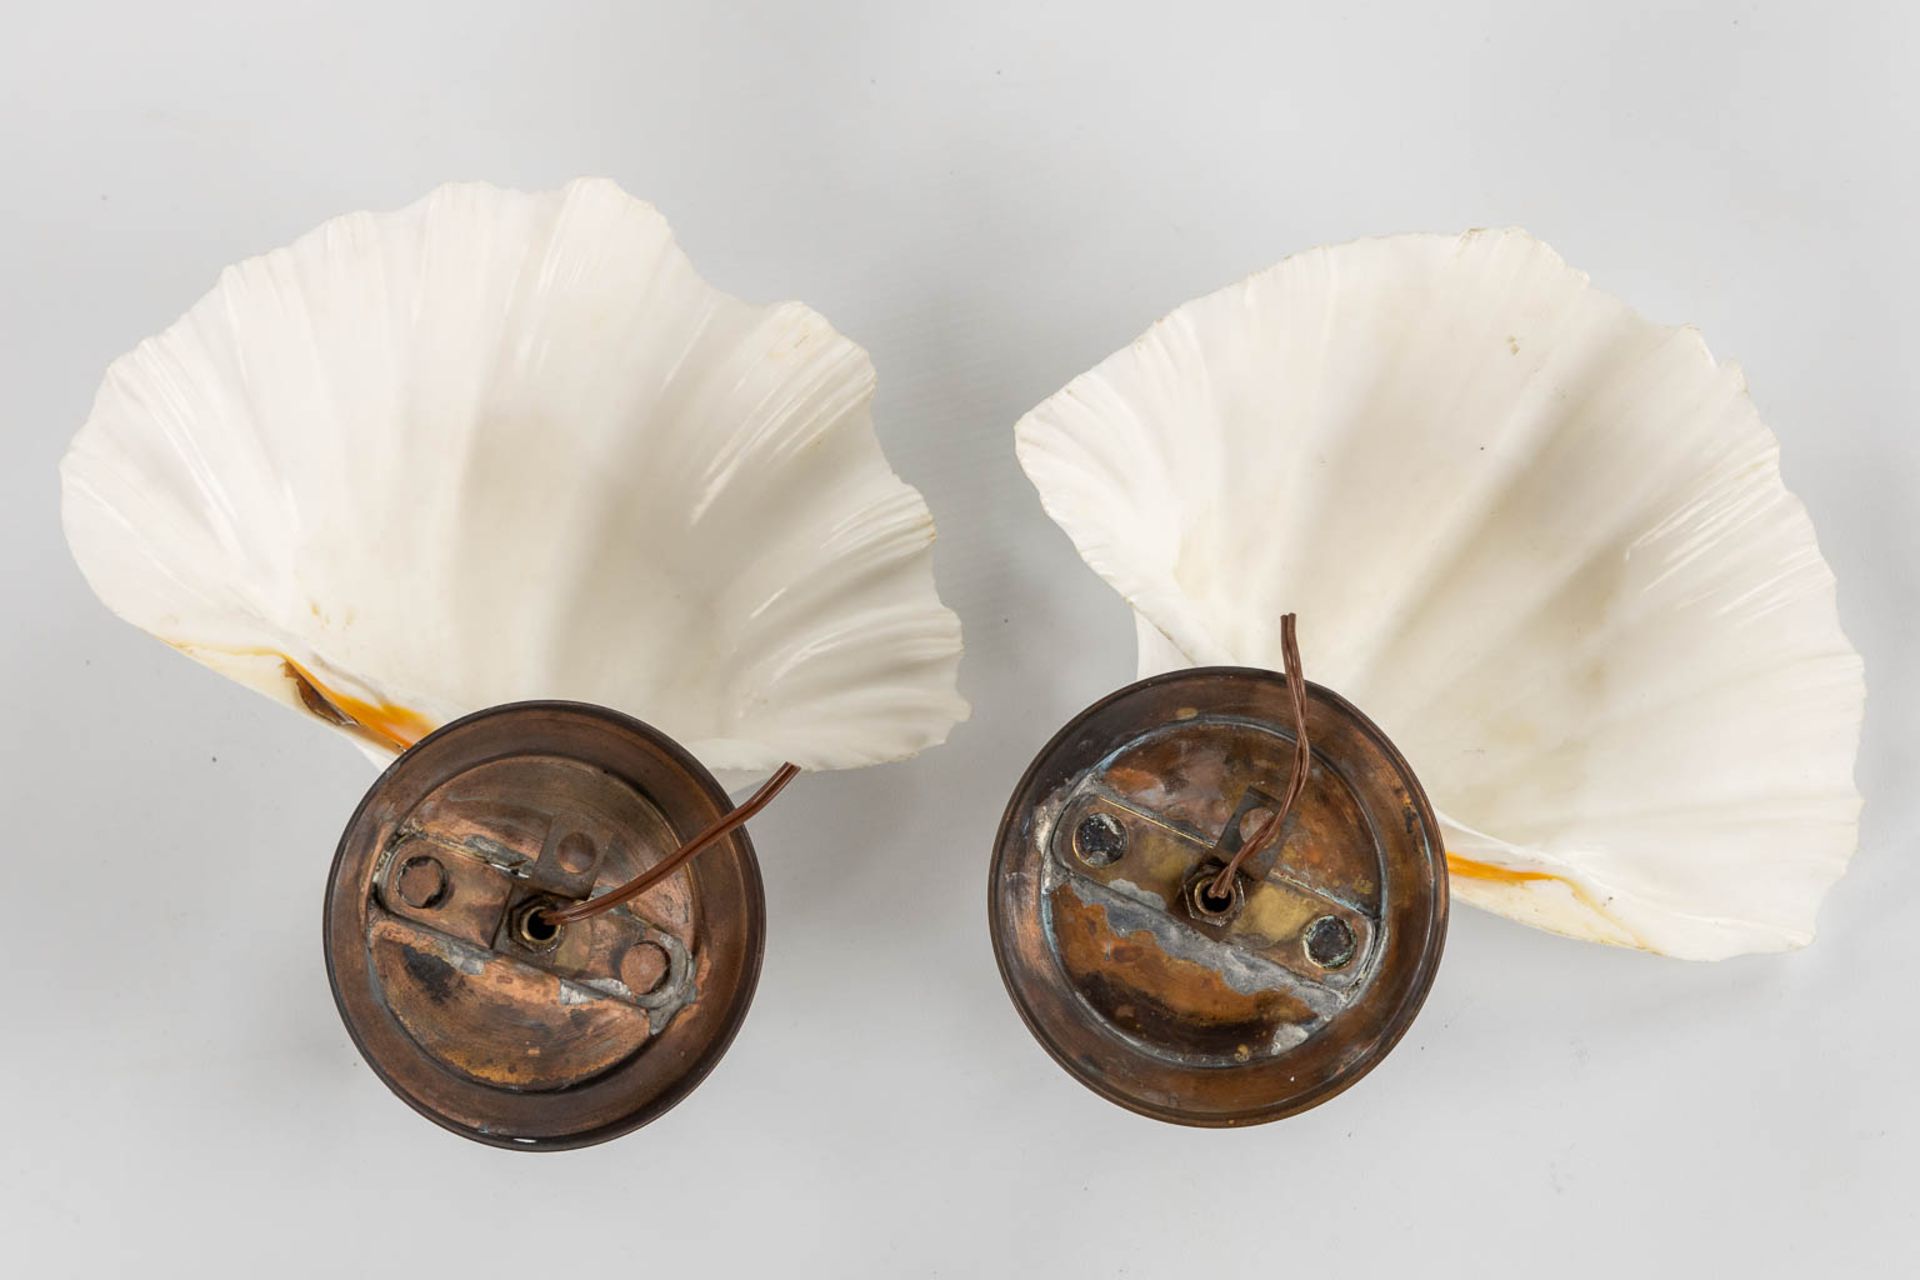 A decorative pair of walllamps, mounted on copper. Circa 1950. (L:13 x W:26 x H:25 cm) - Image 3 of 5